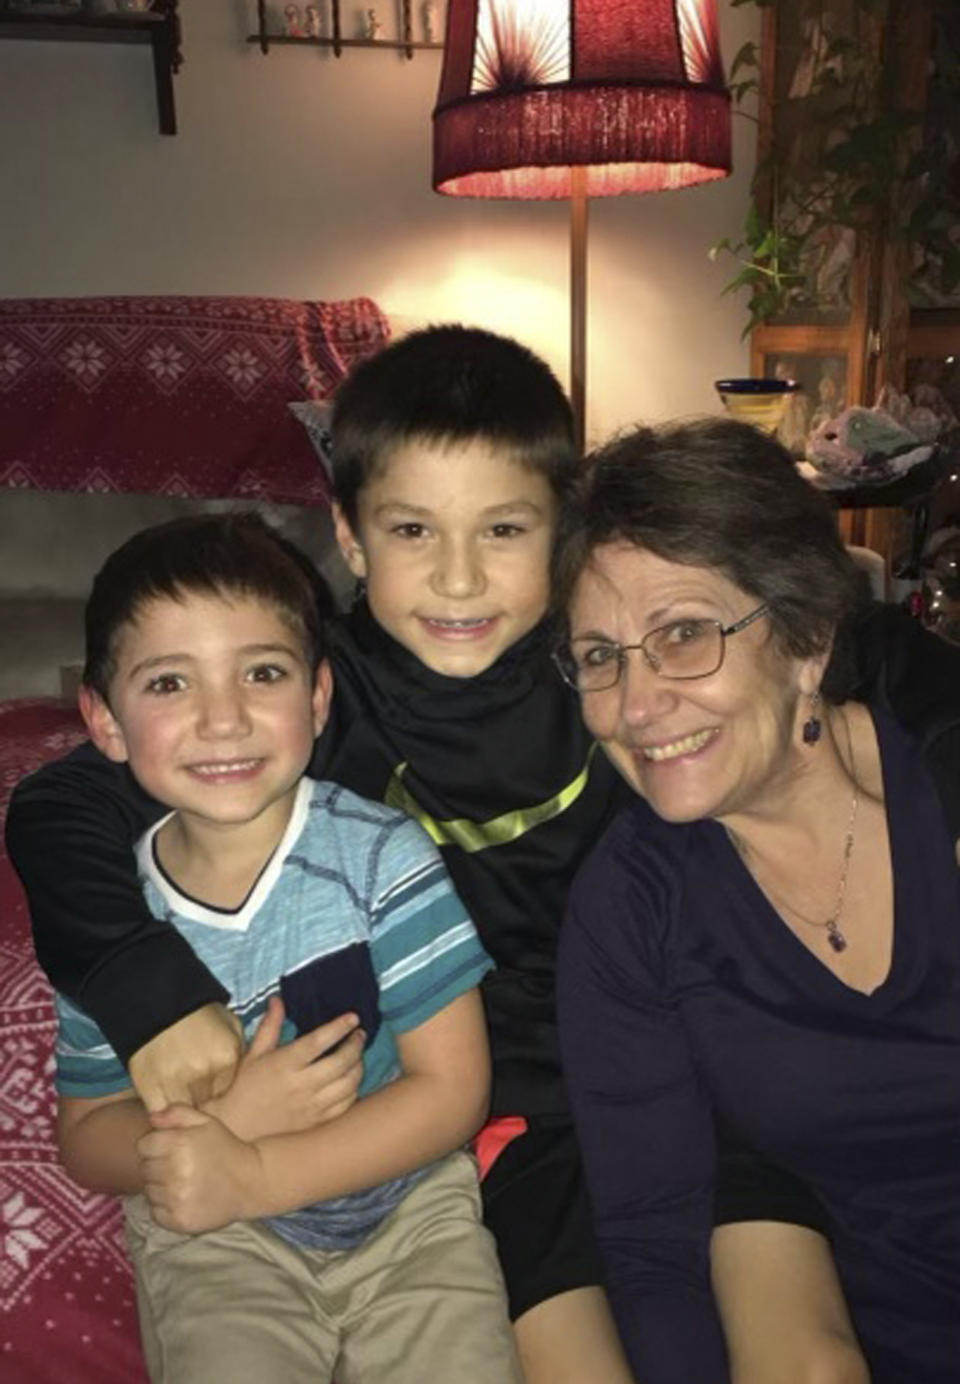 In this December 2019 photo, provided by Barbara Trout, she poses with grandsons Grayson, center, and Garrett, left, in Keizer, Ore. Trout, who suffers from asthma, was taken to ambulance to a hospital twice in September following exposure to smoke from wildfires that reached hazardous levels. (Barbara Trout via AP)